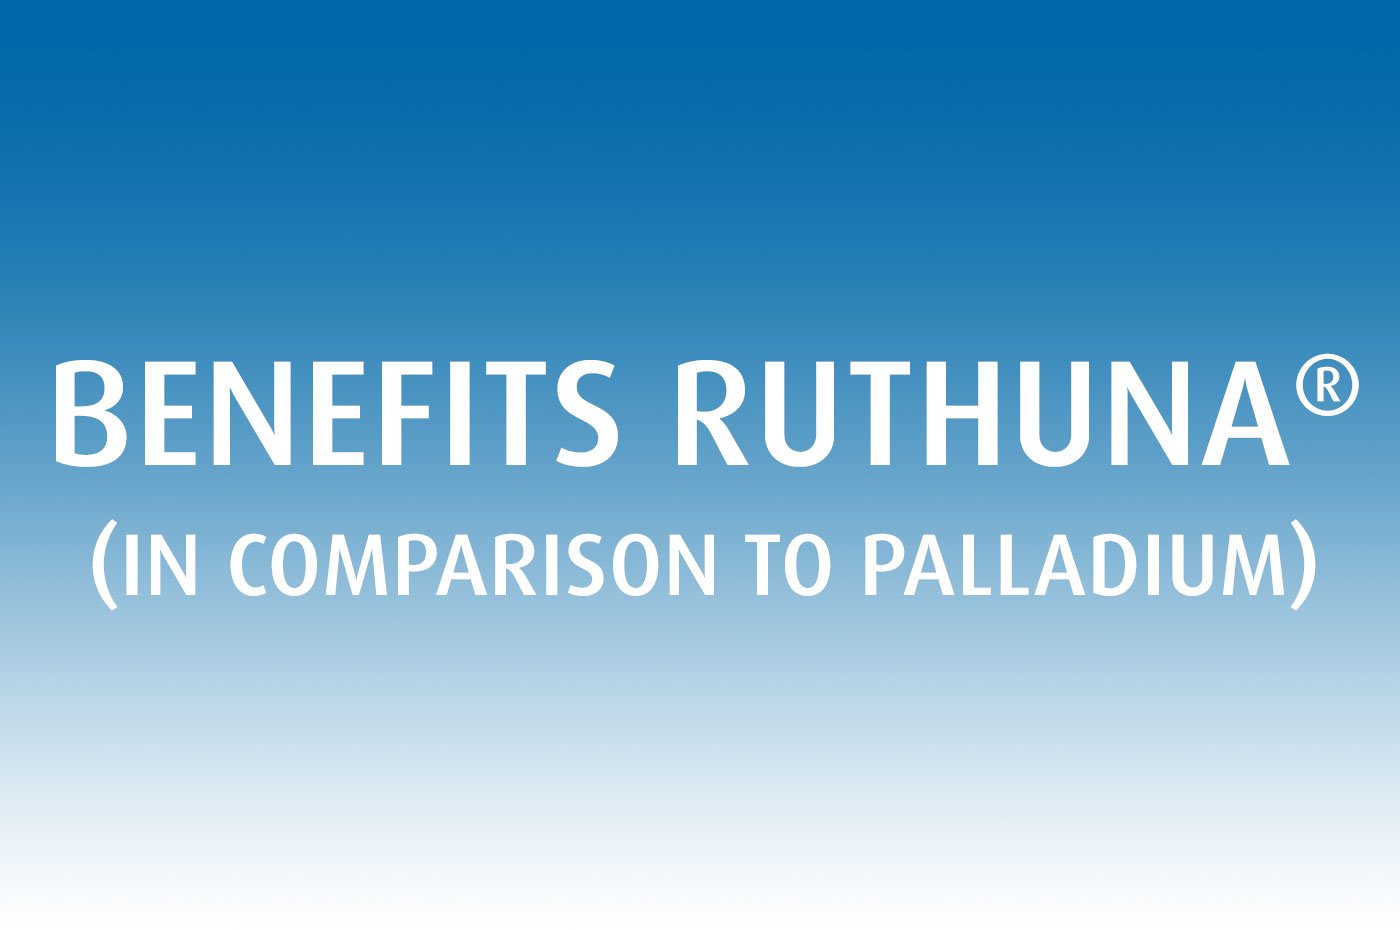 Ruthenium as substitute for palladium plating with clear price advantage - Umicore Metal Deposition Solutions - RUTHUNA benefits